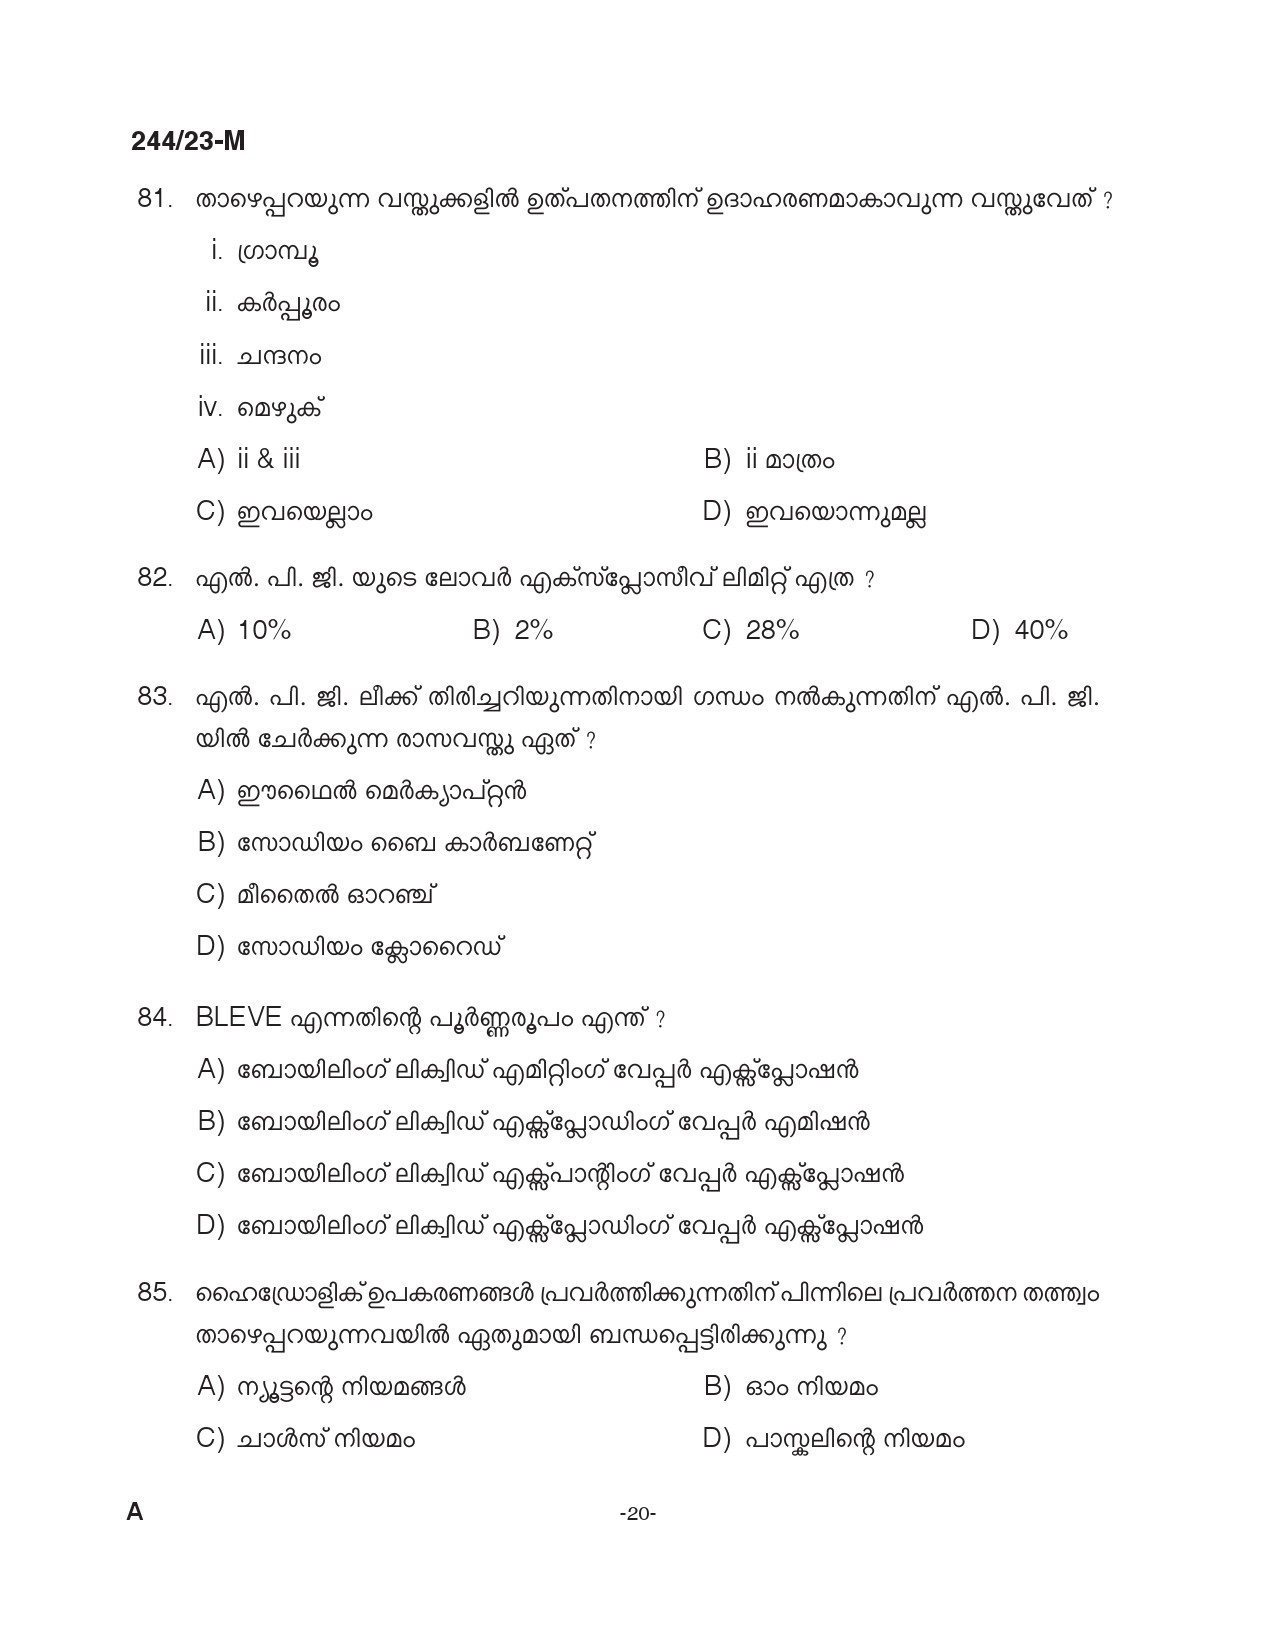 KPSC Fire and Rescue Officer Trainee Malayalam Exam 2023 Code 2442023 M 19